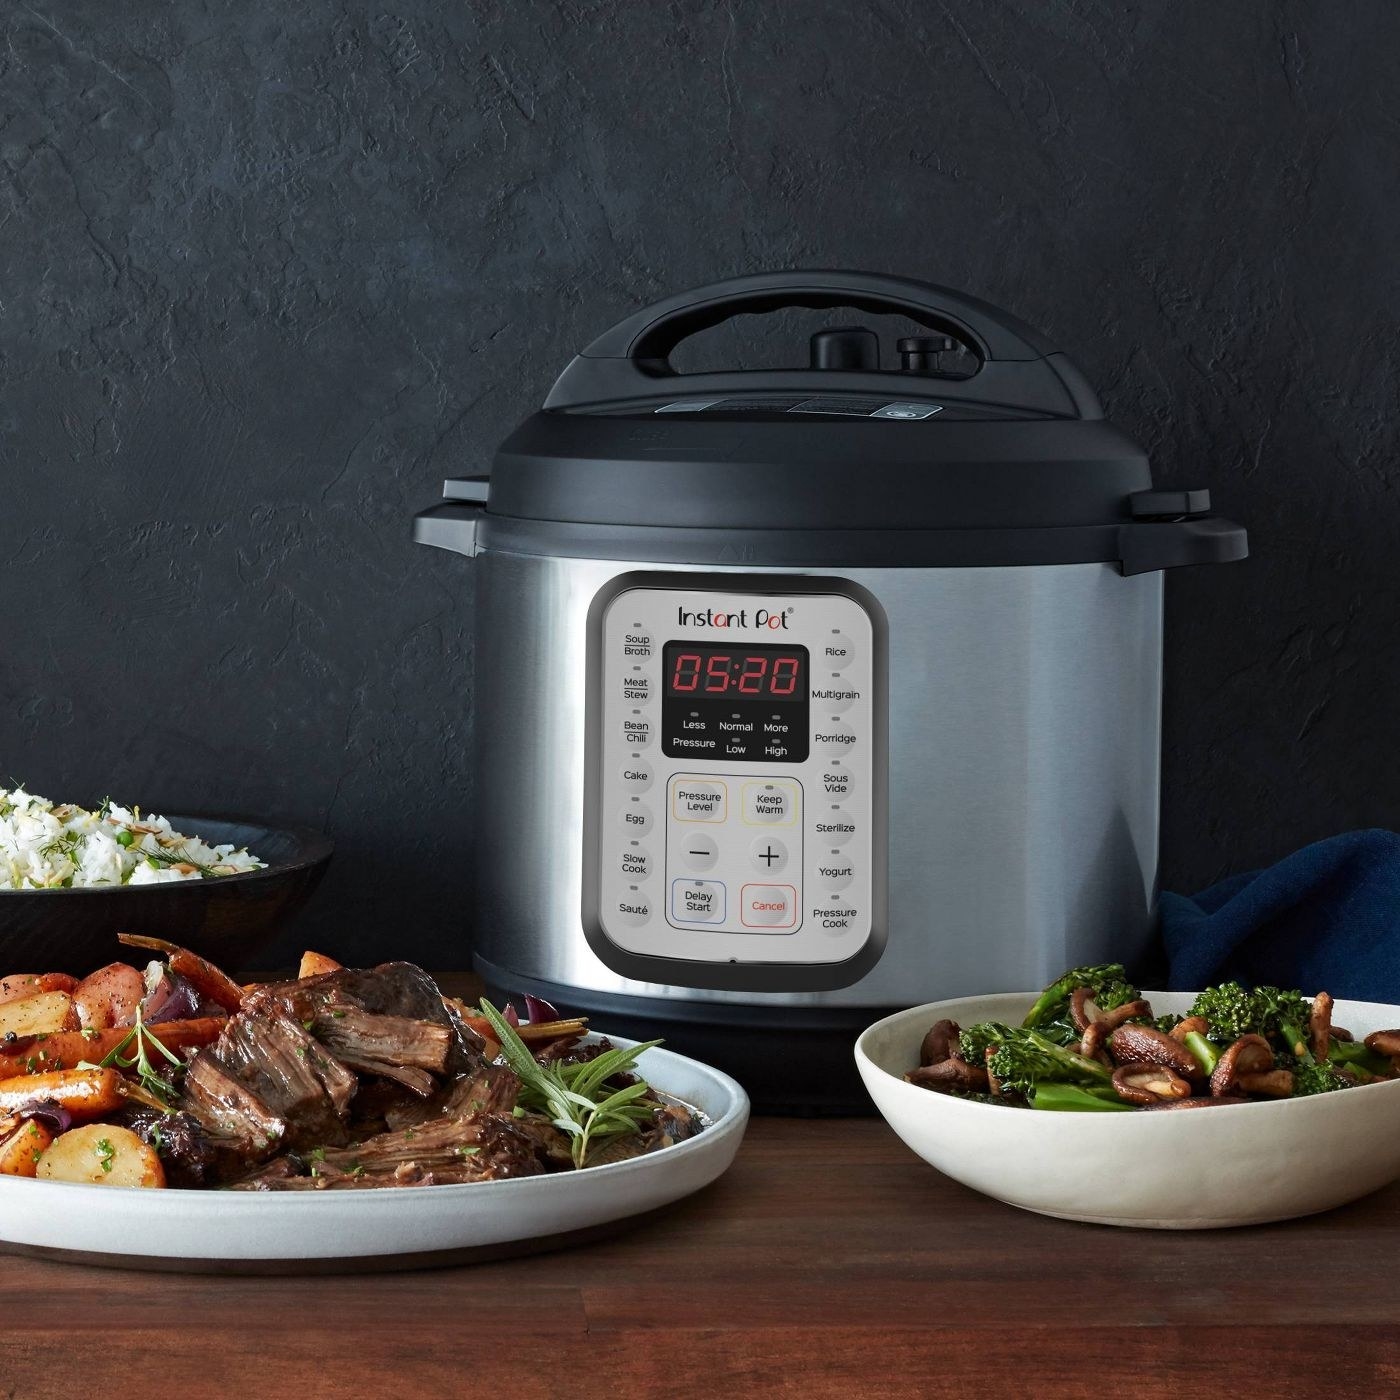 The Instant Pot sits on a table